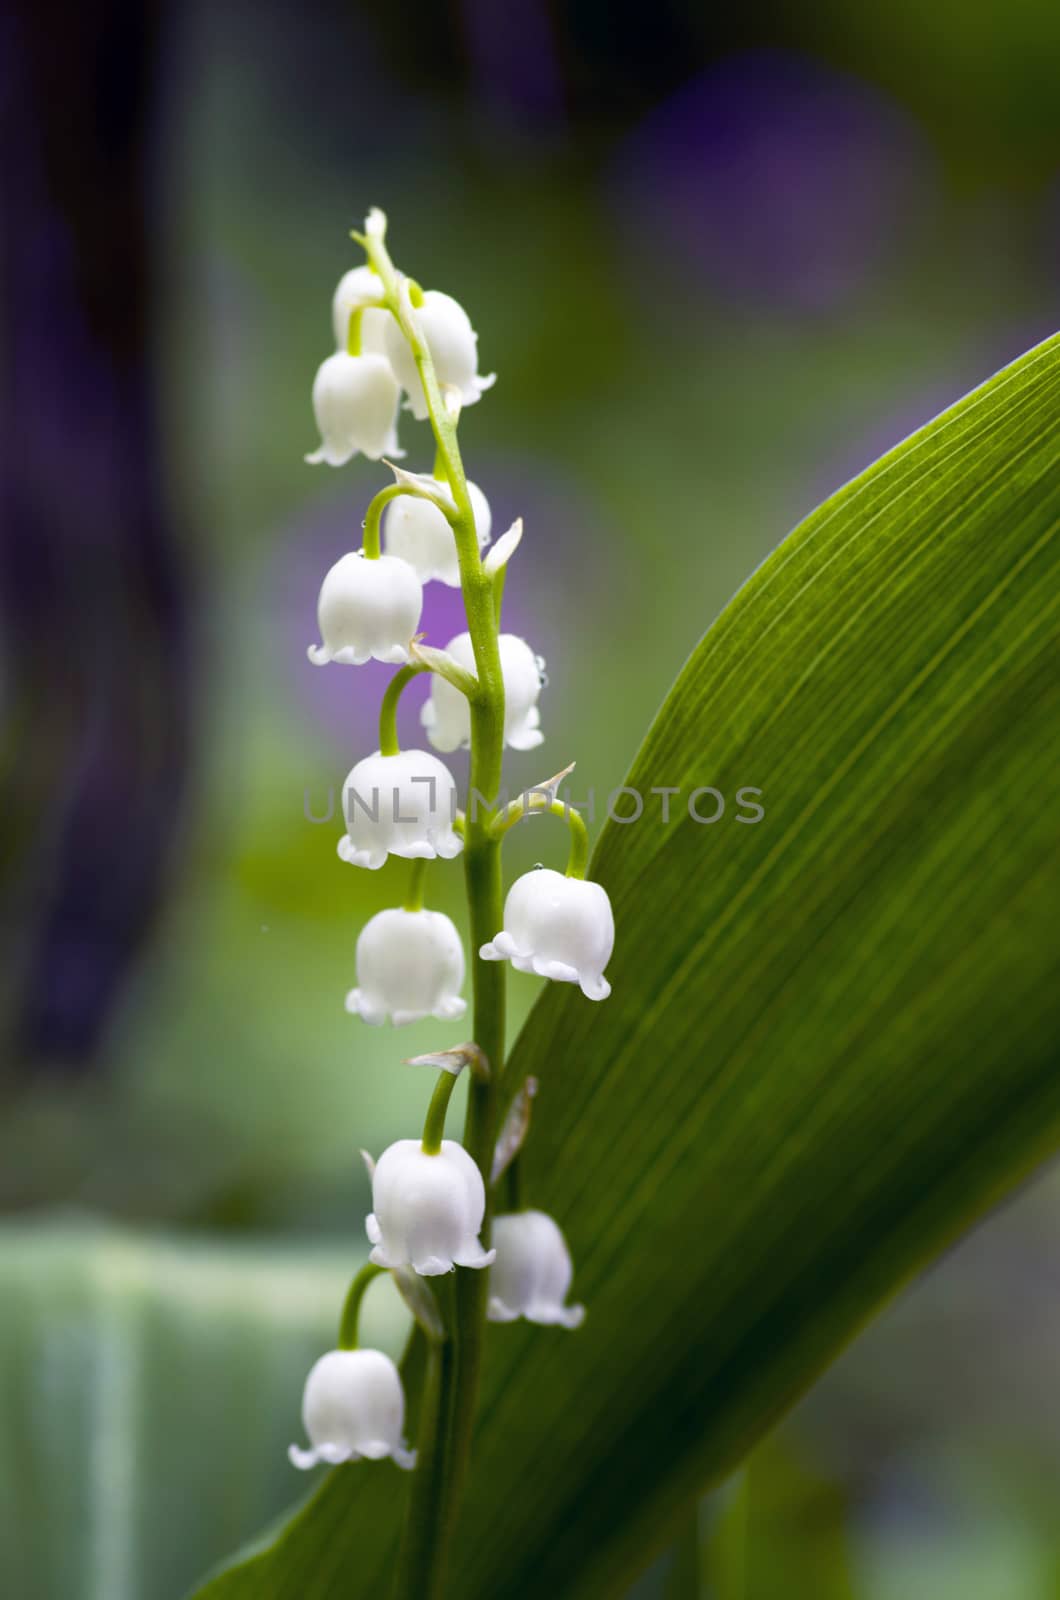 Close up of Lily of the valley 